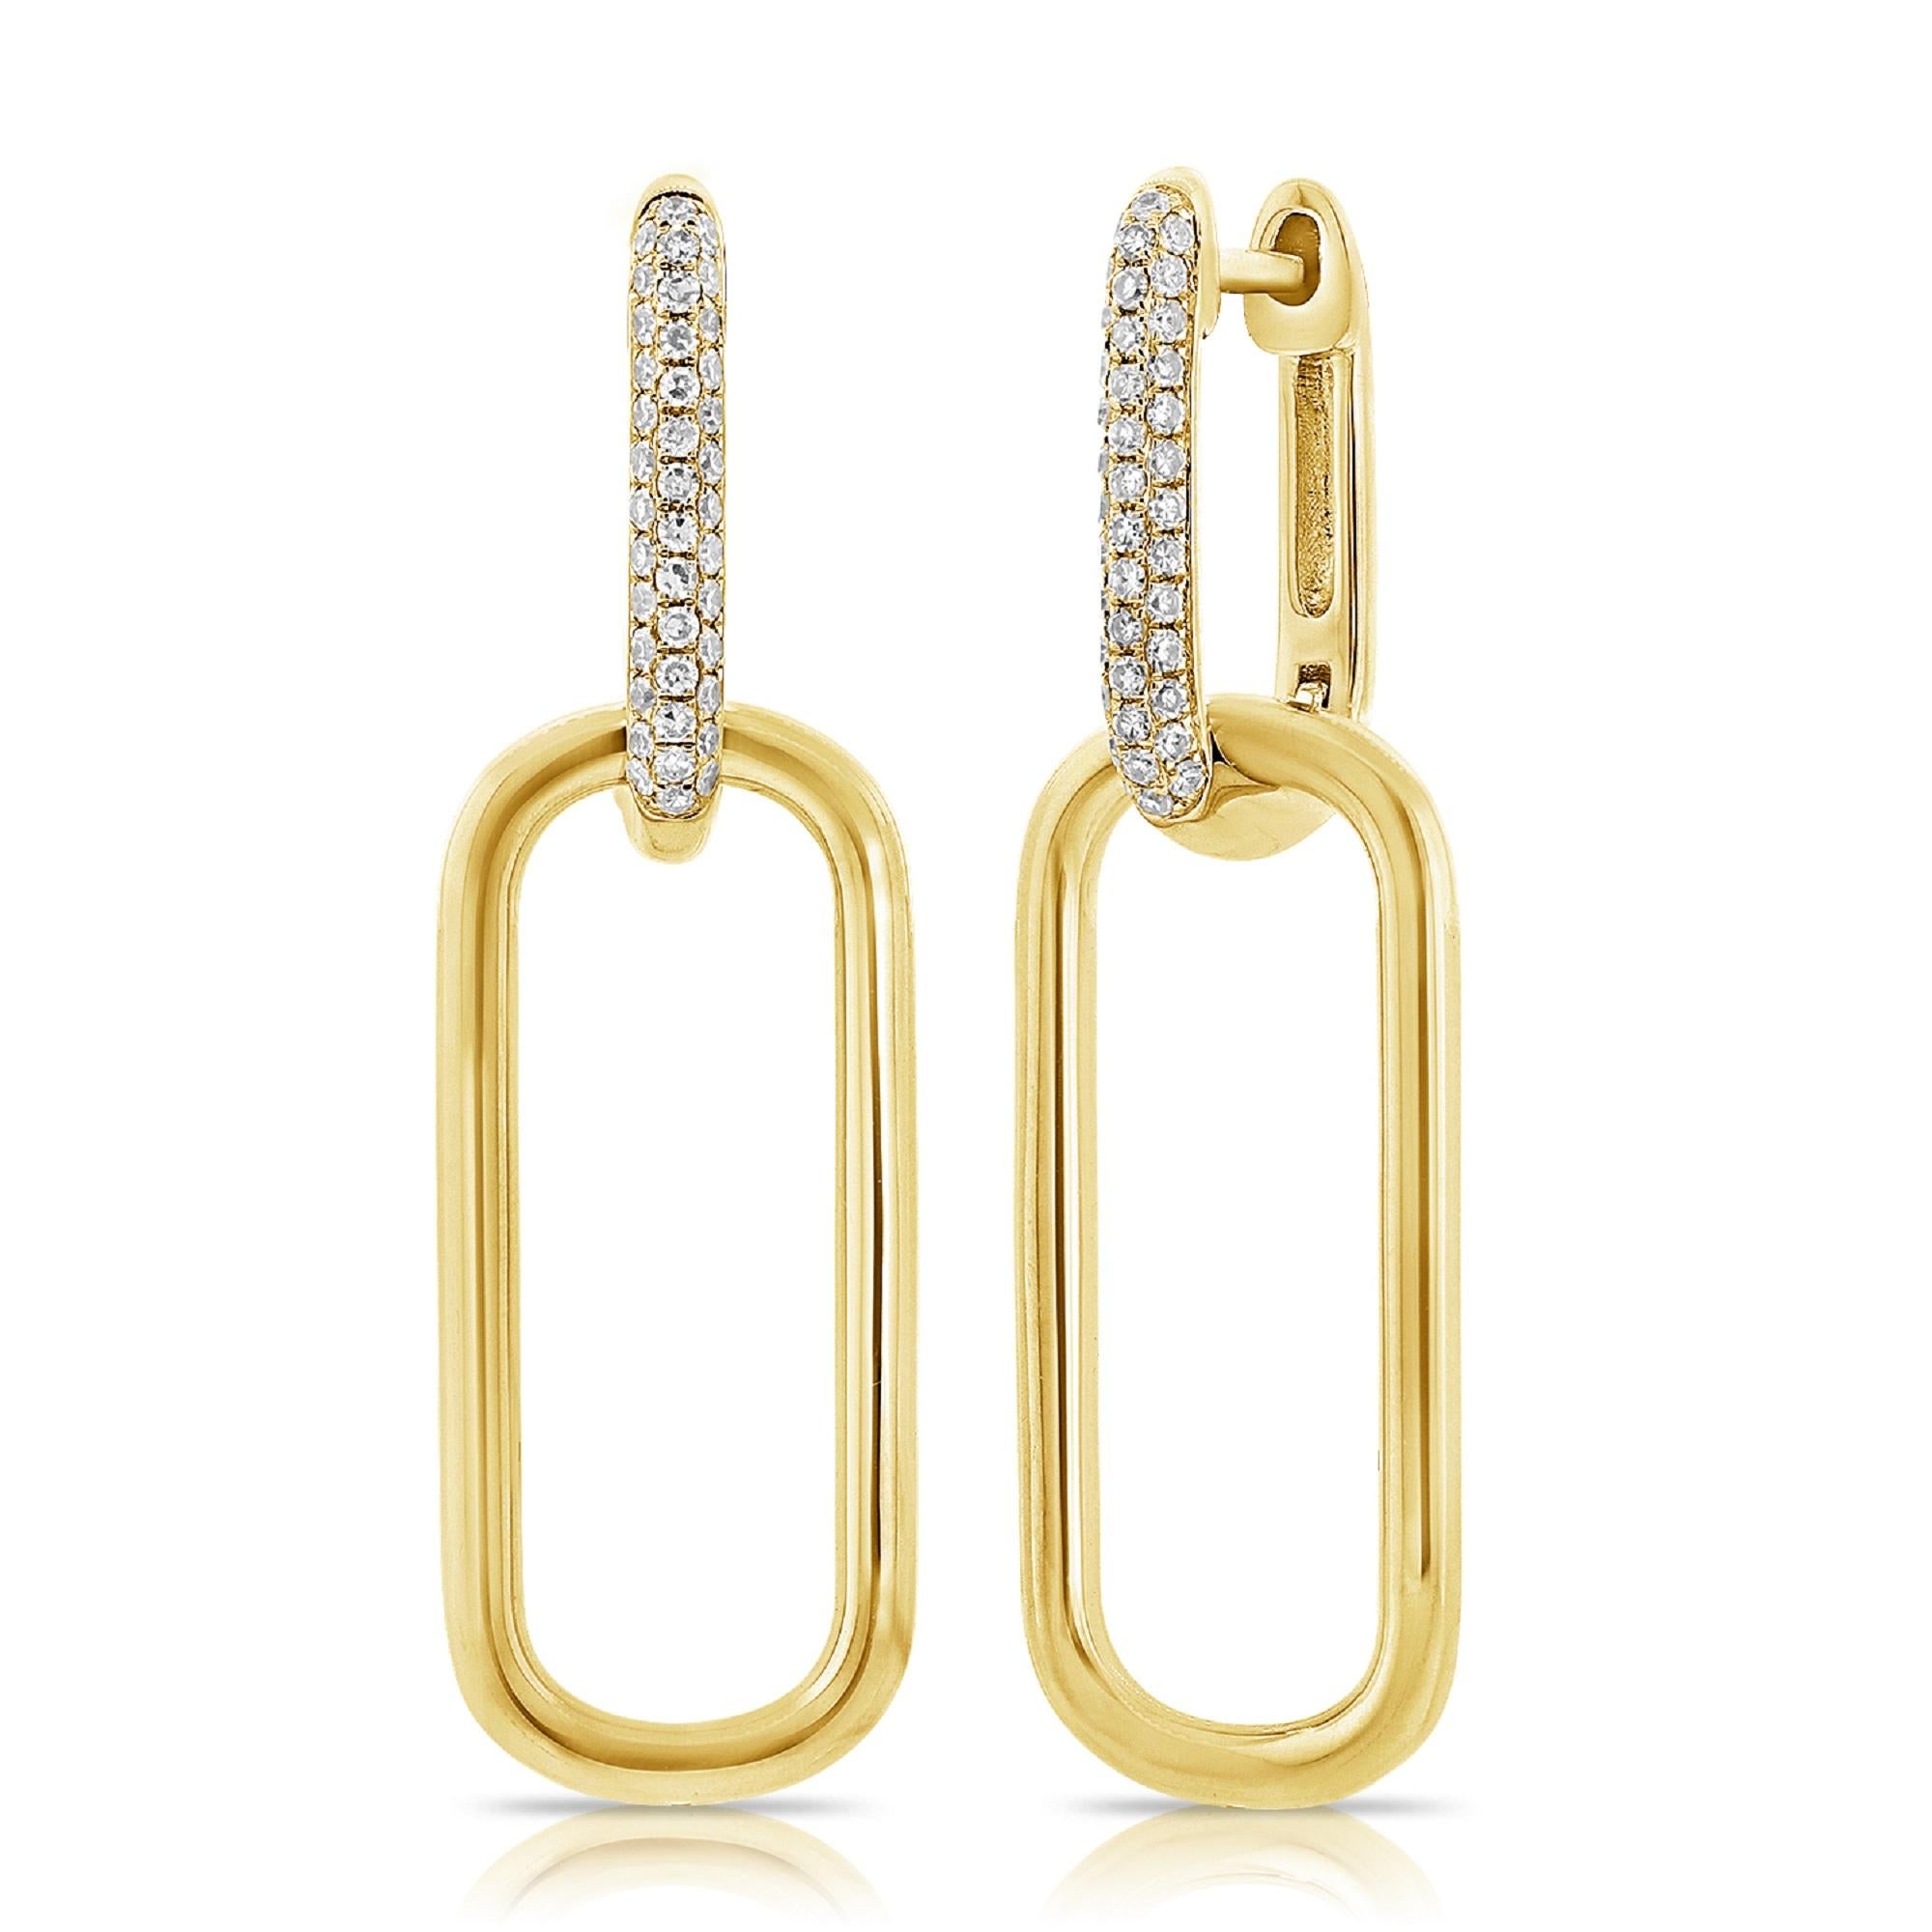 Quality Diamond Link Earrings: Made from real 14k gold and 80 glittering natural white approximately 0.21 ct. Certified diamonds, featuring a link design dangle with a color and clarity of GH-SI. Earring Measurement is 1 1/5 inche Drop

Surprise